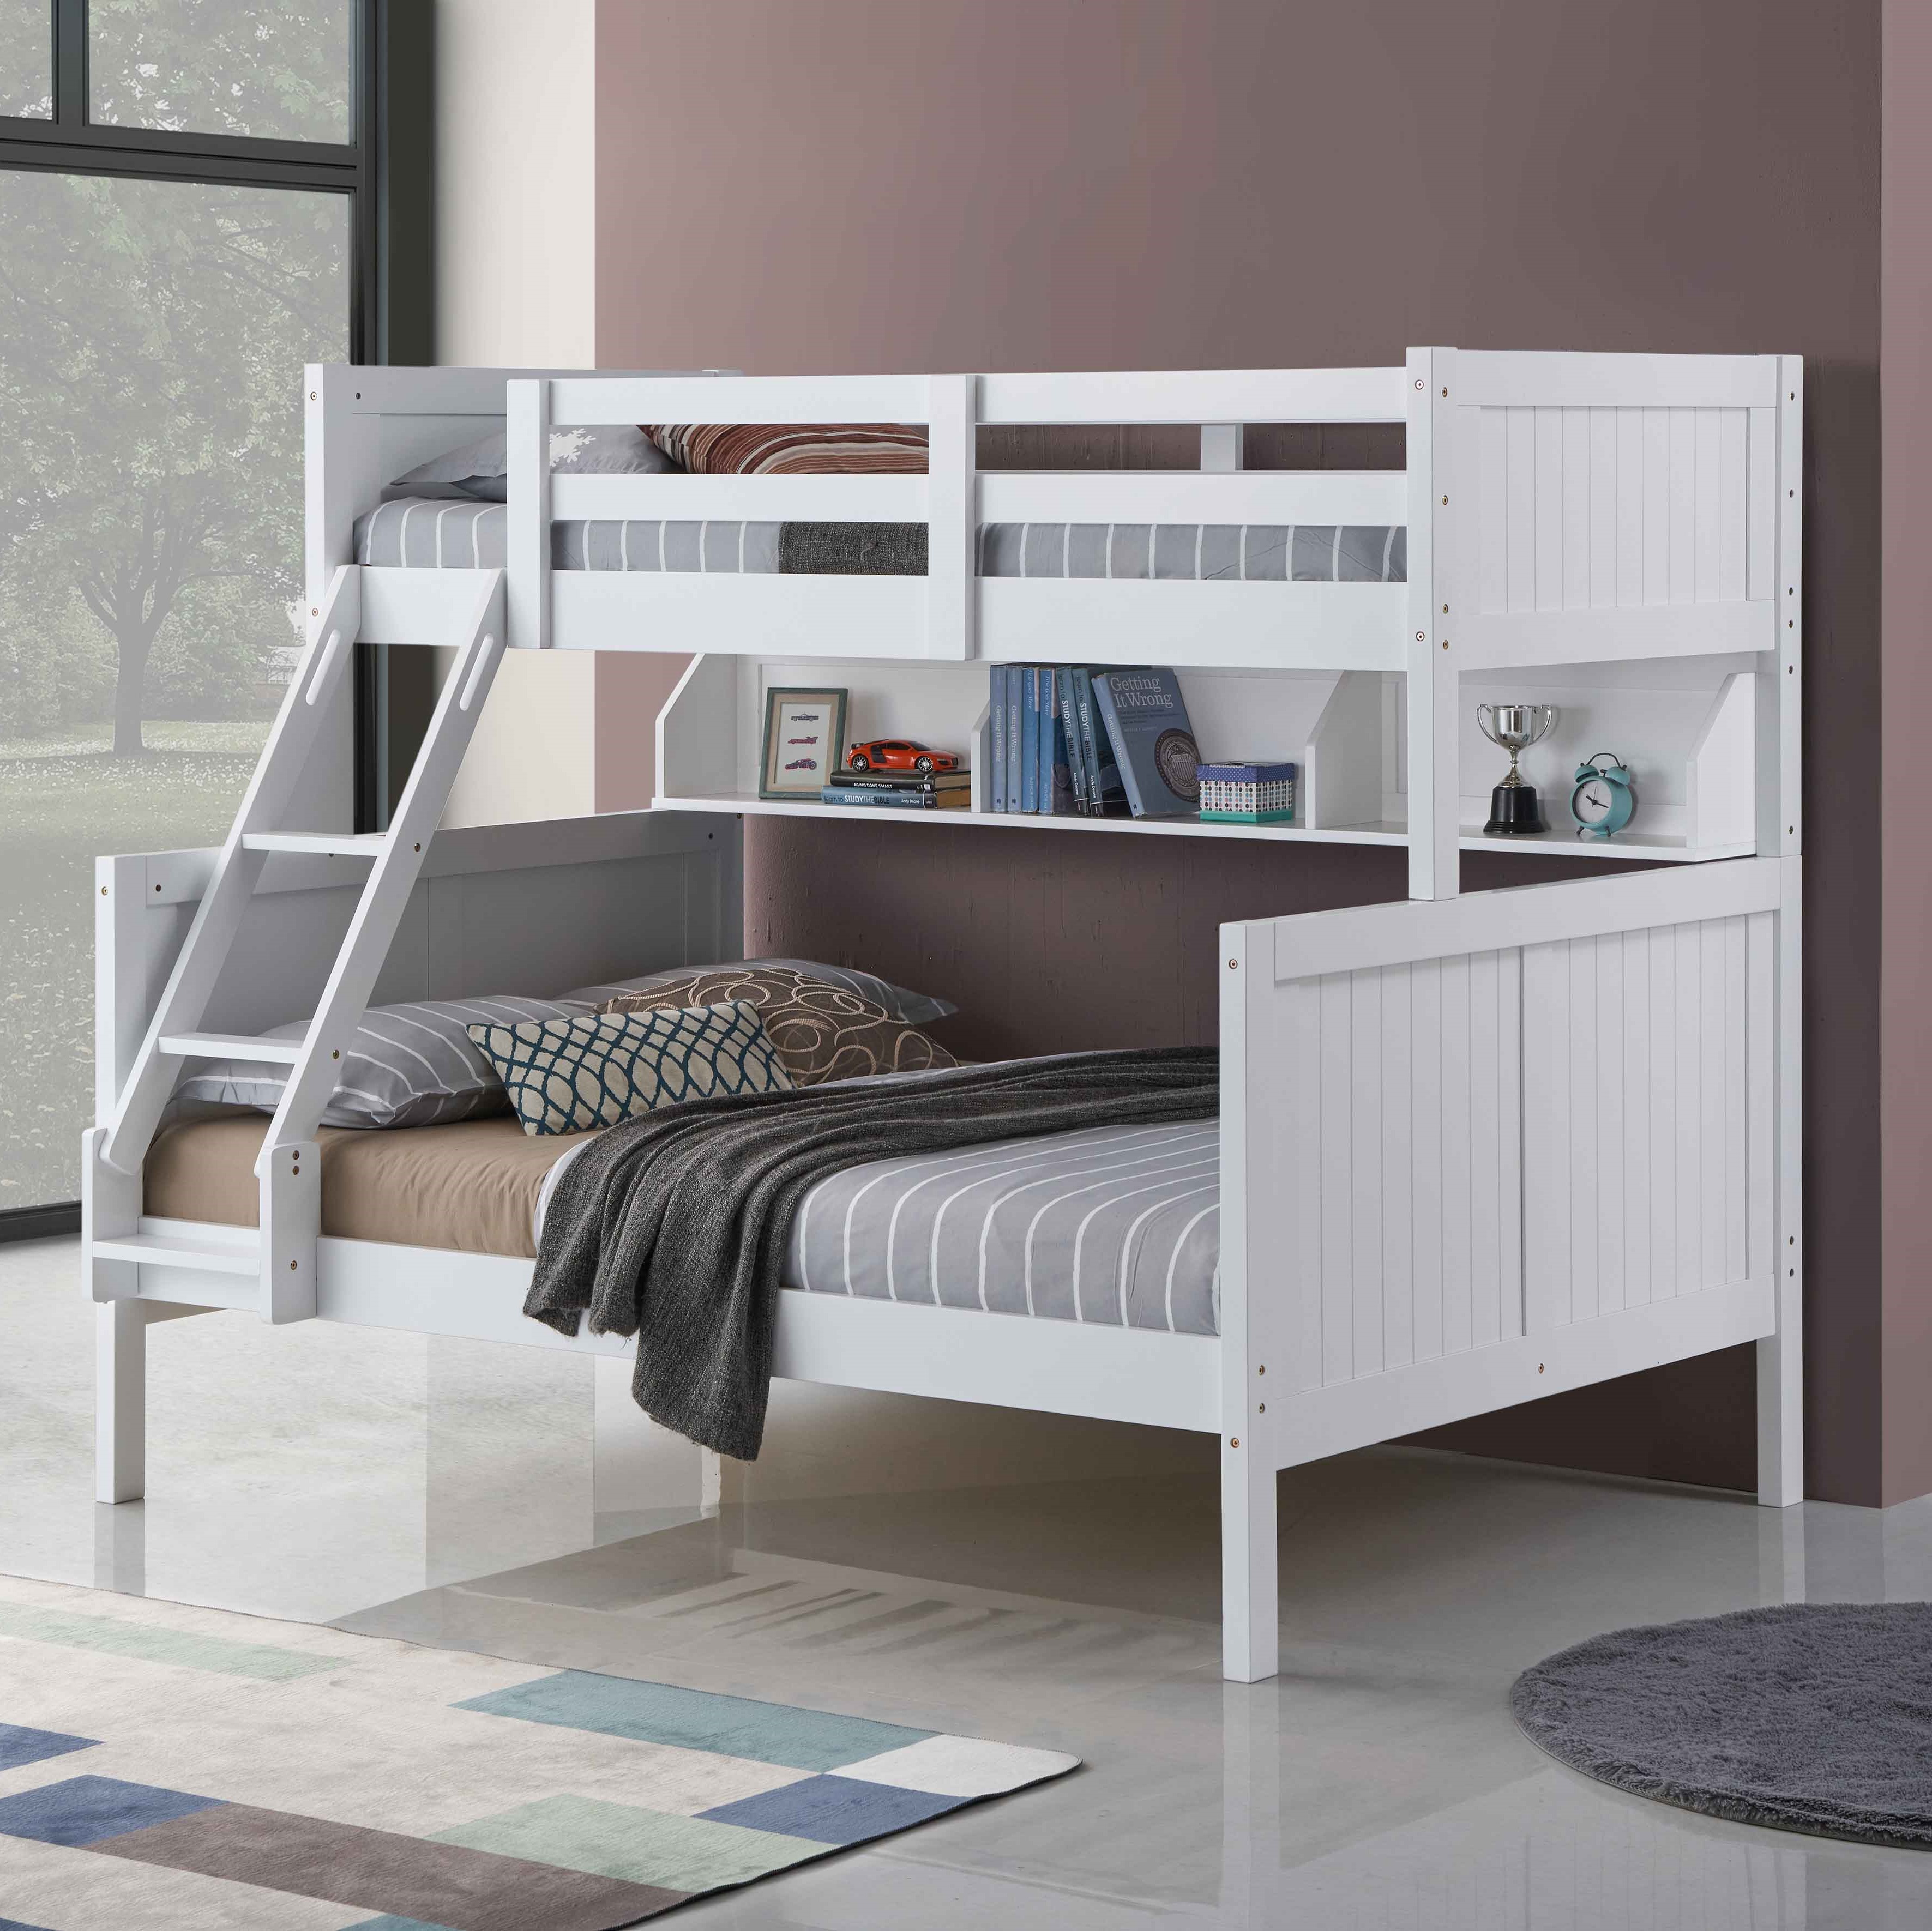 Double Bunk Bed Storage Trundle, Twin Double Bunk Bed With Trundle